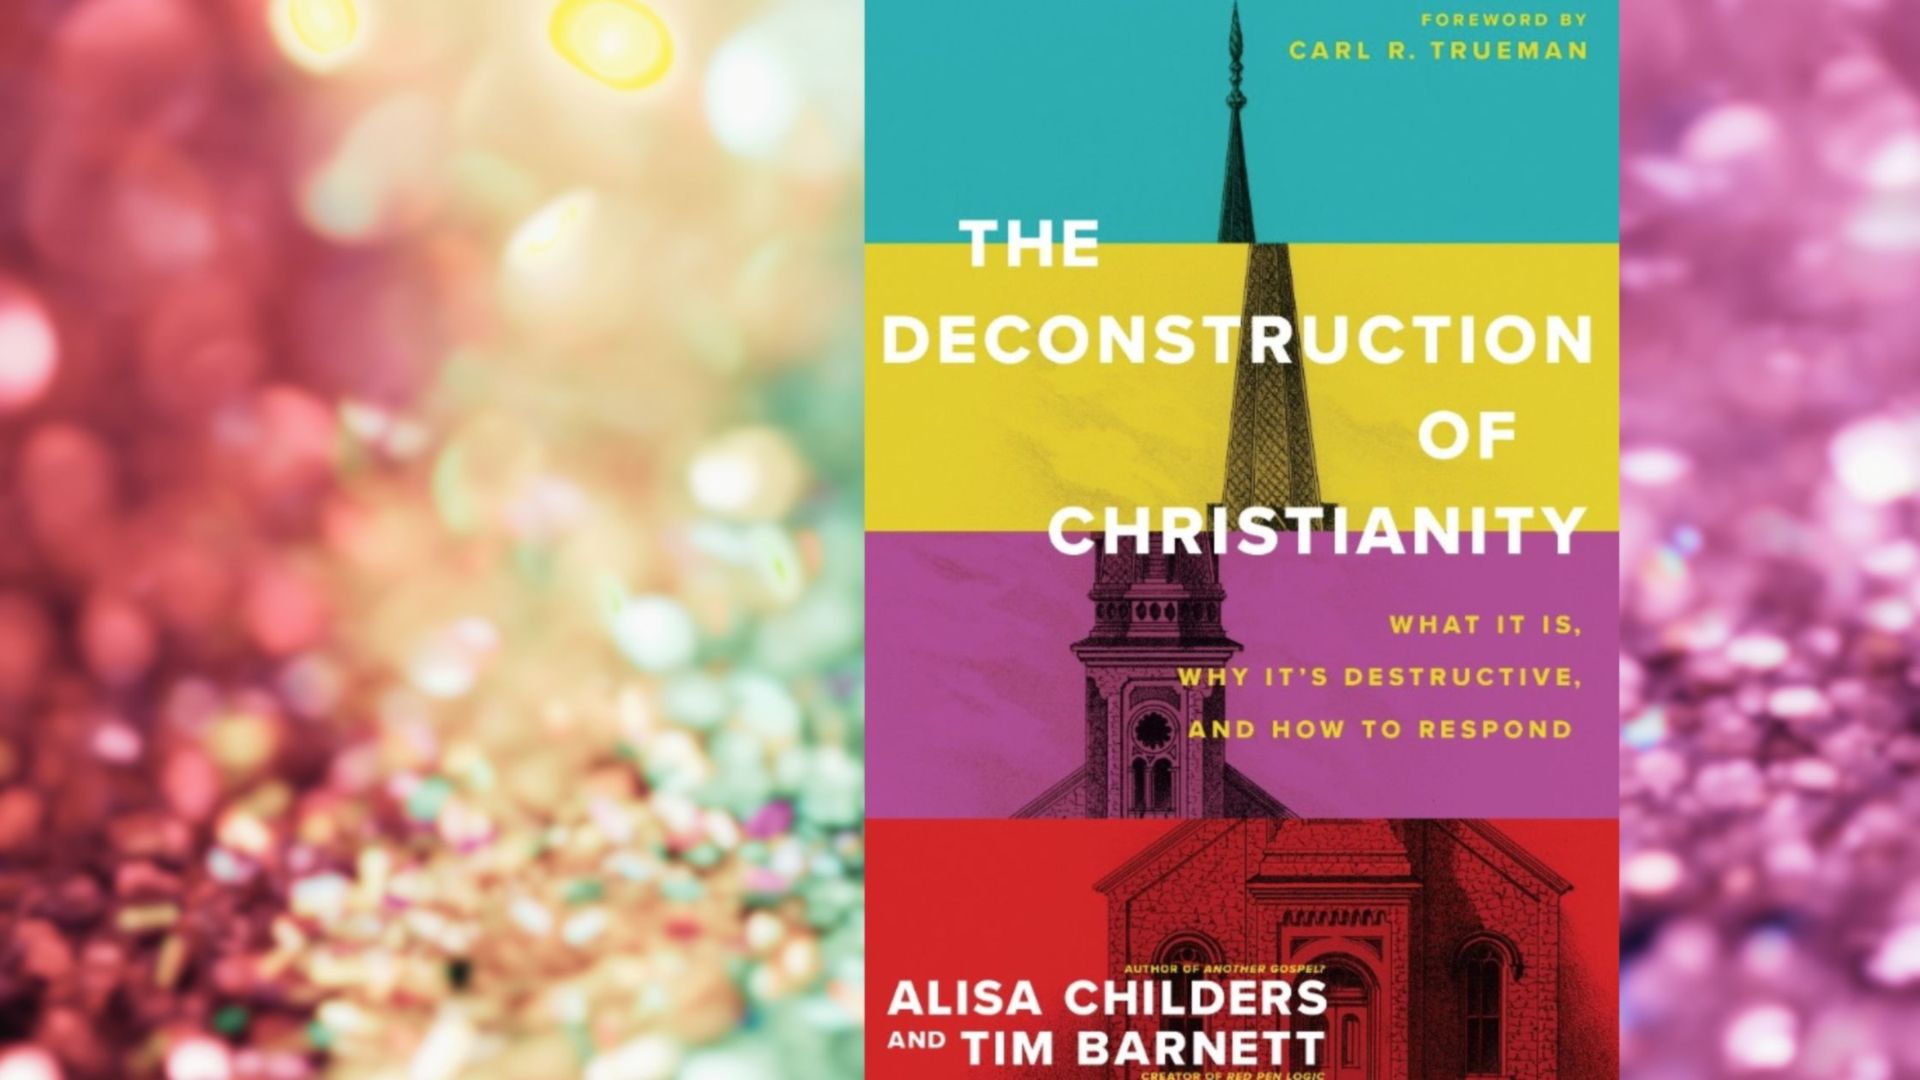 A review of the book 'The Deconstruction of Christianity: What it is, Why it’s Destructive, and How to Respond''